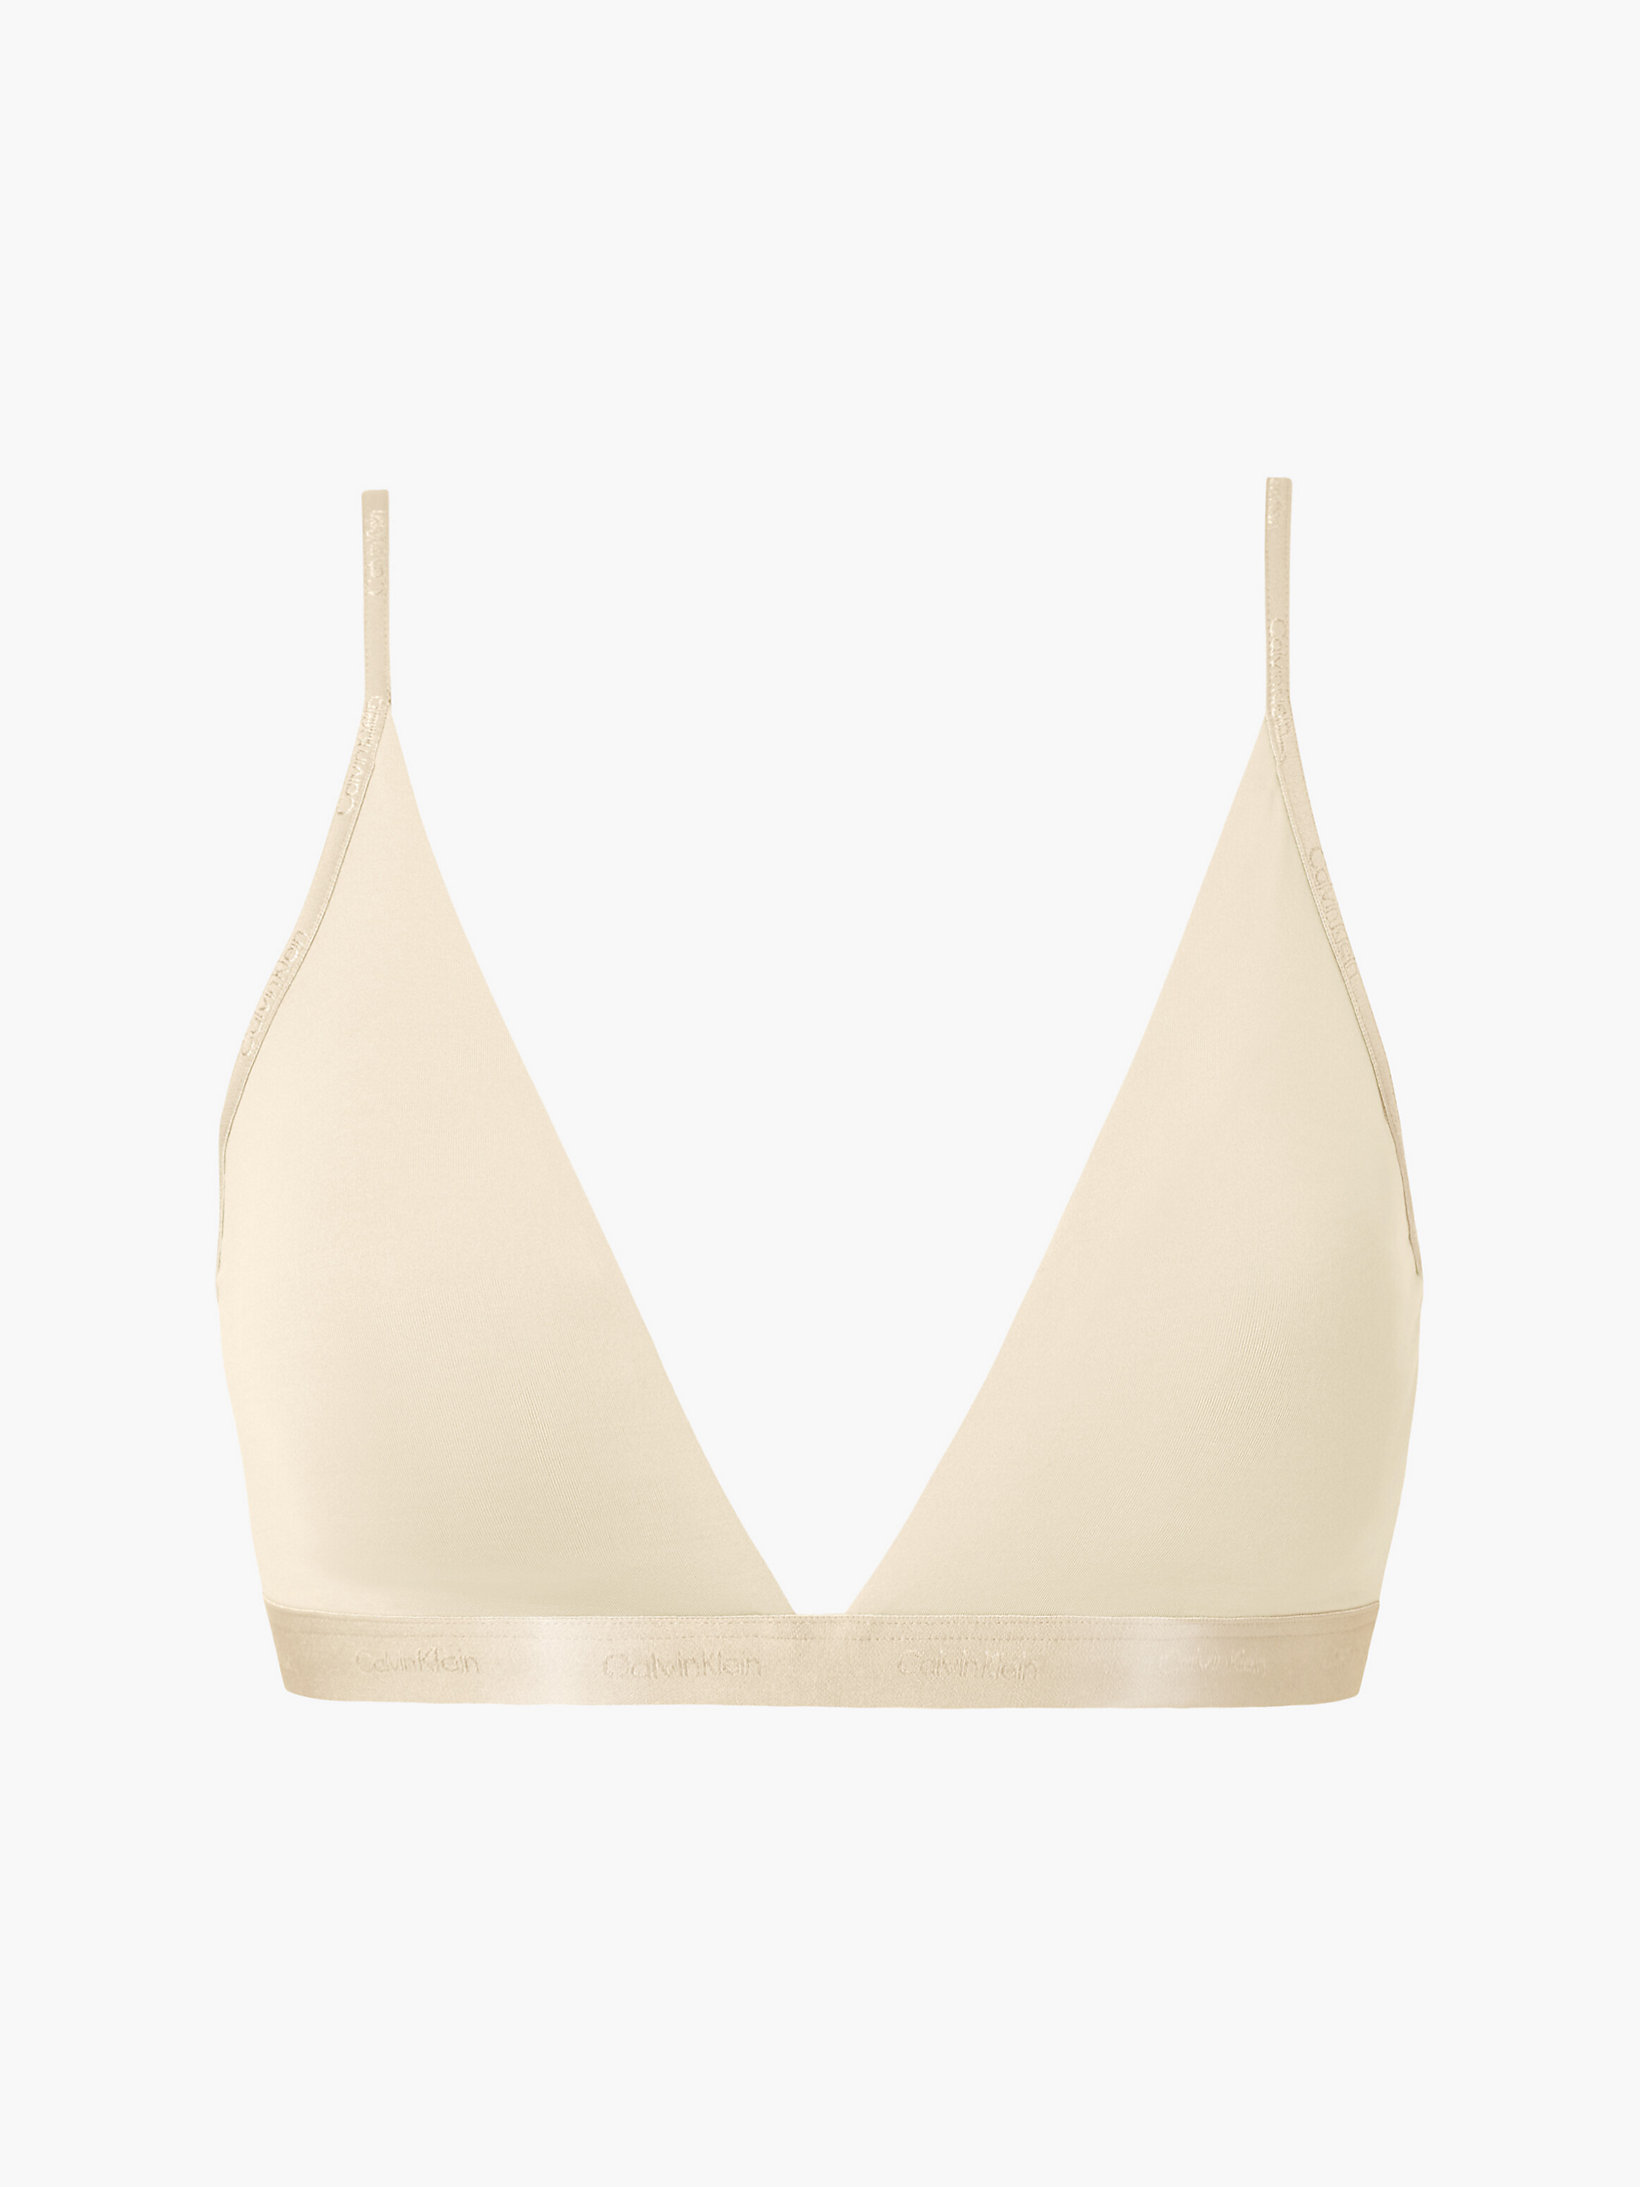 Soutien-Gorge Triangle - Form To Body > Stone > undefined femmes > Calvin Klein